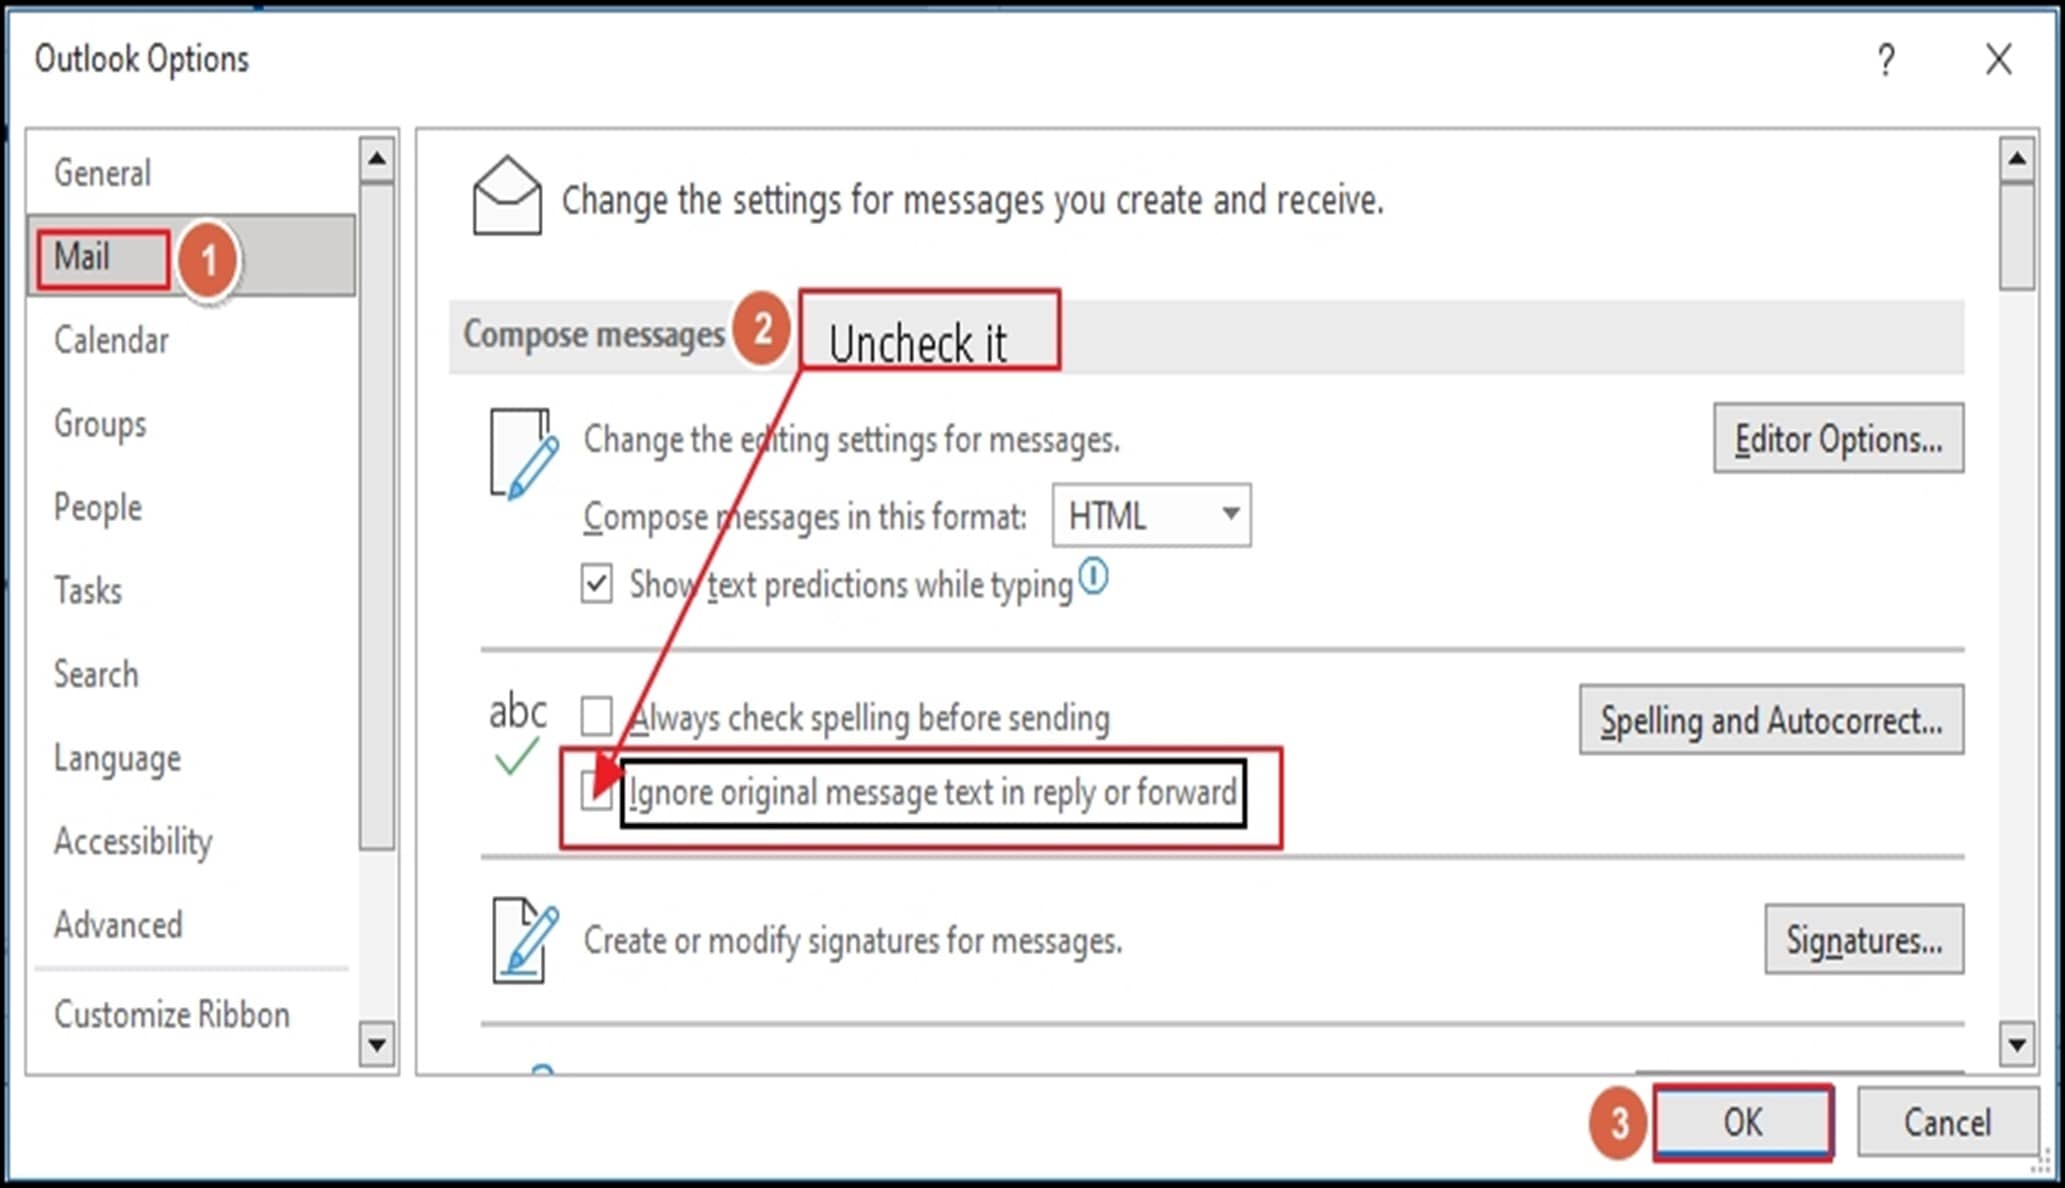 Disable message ignoring option